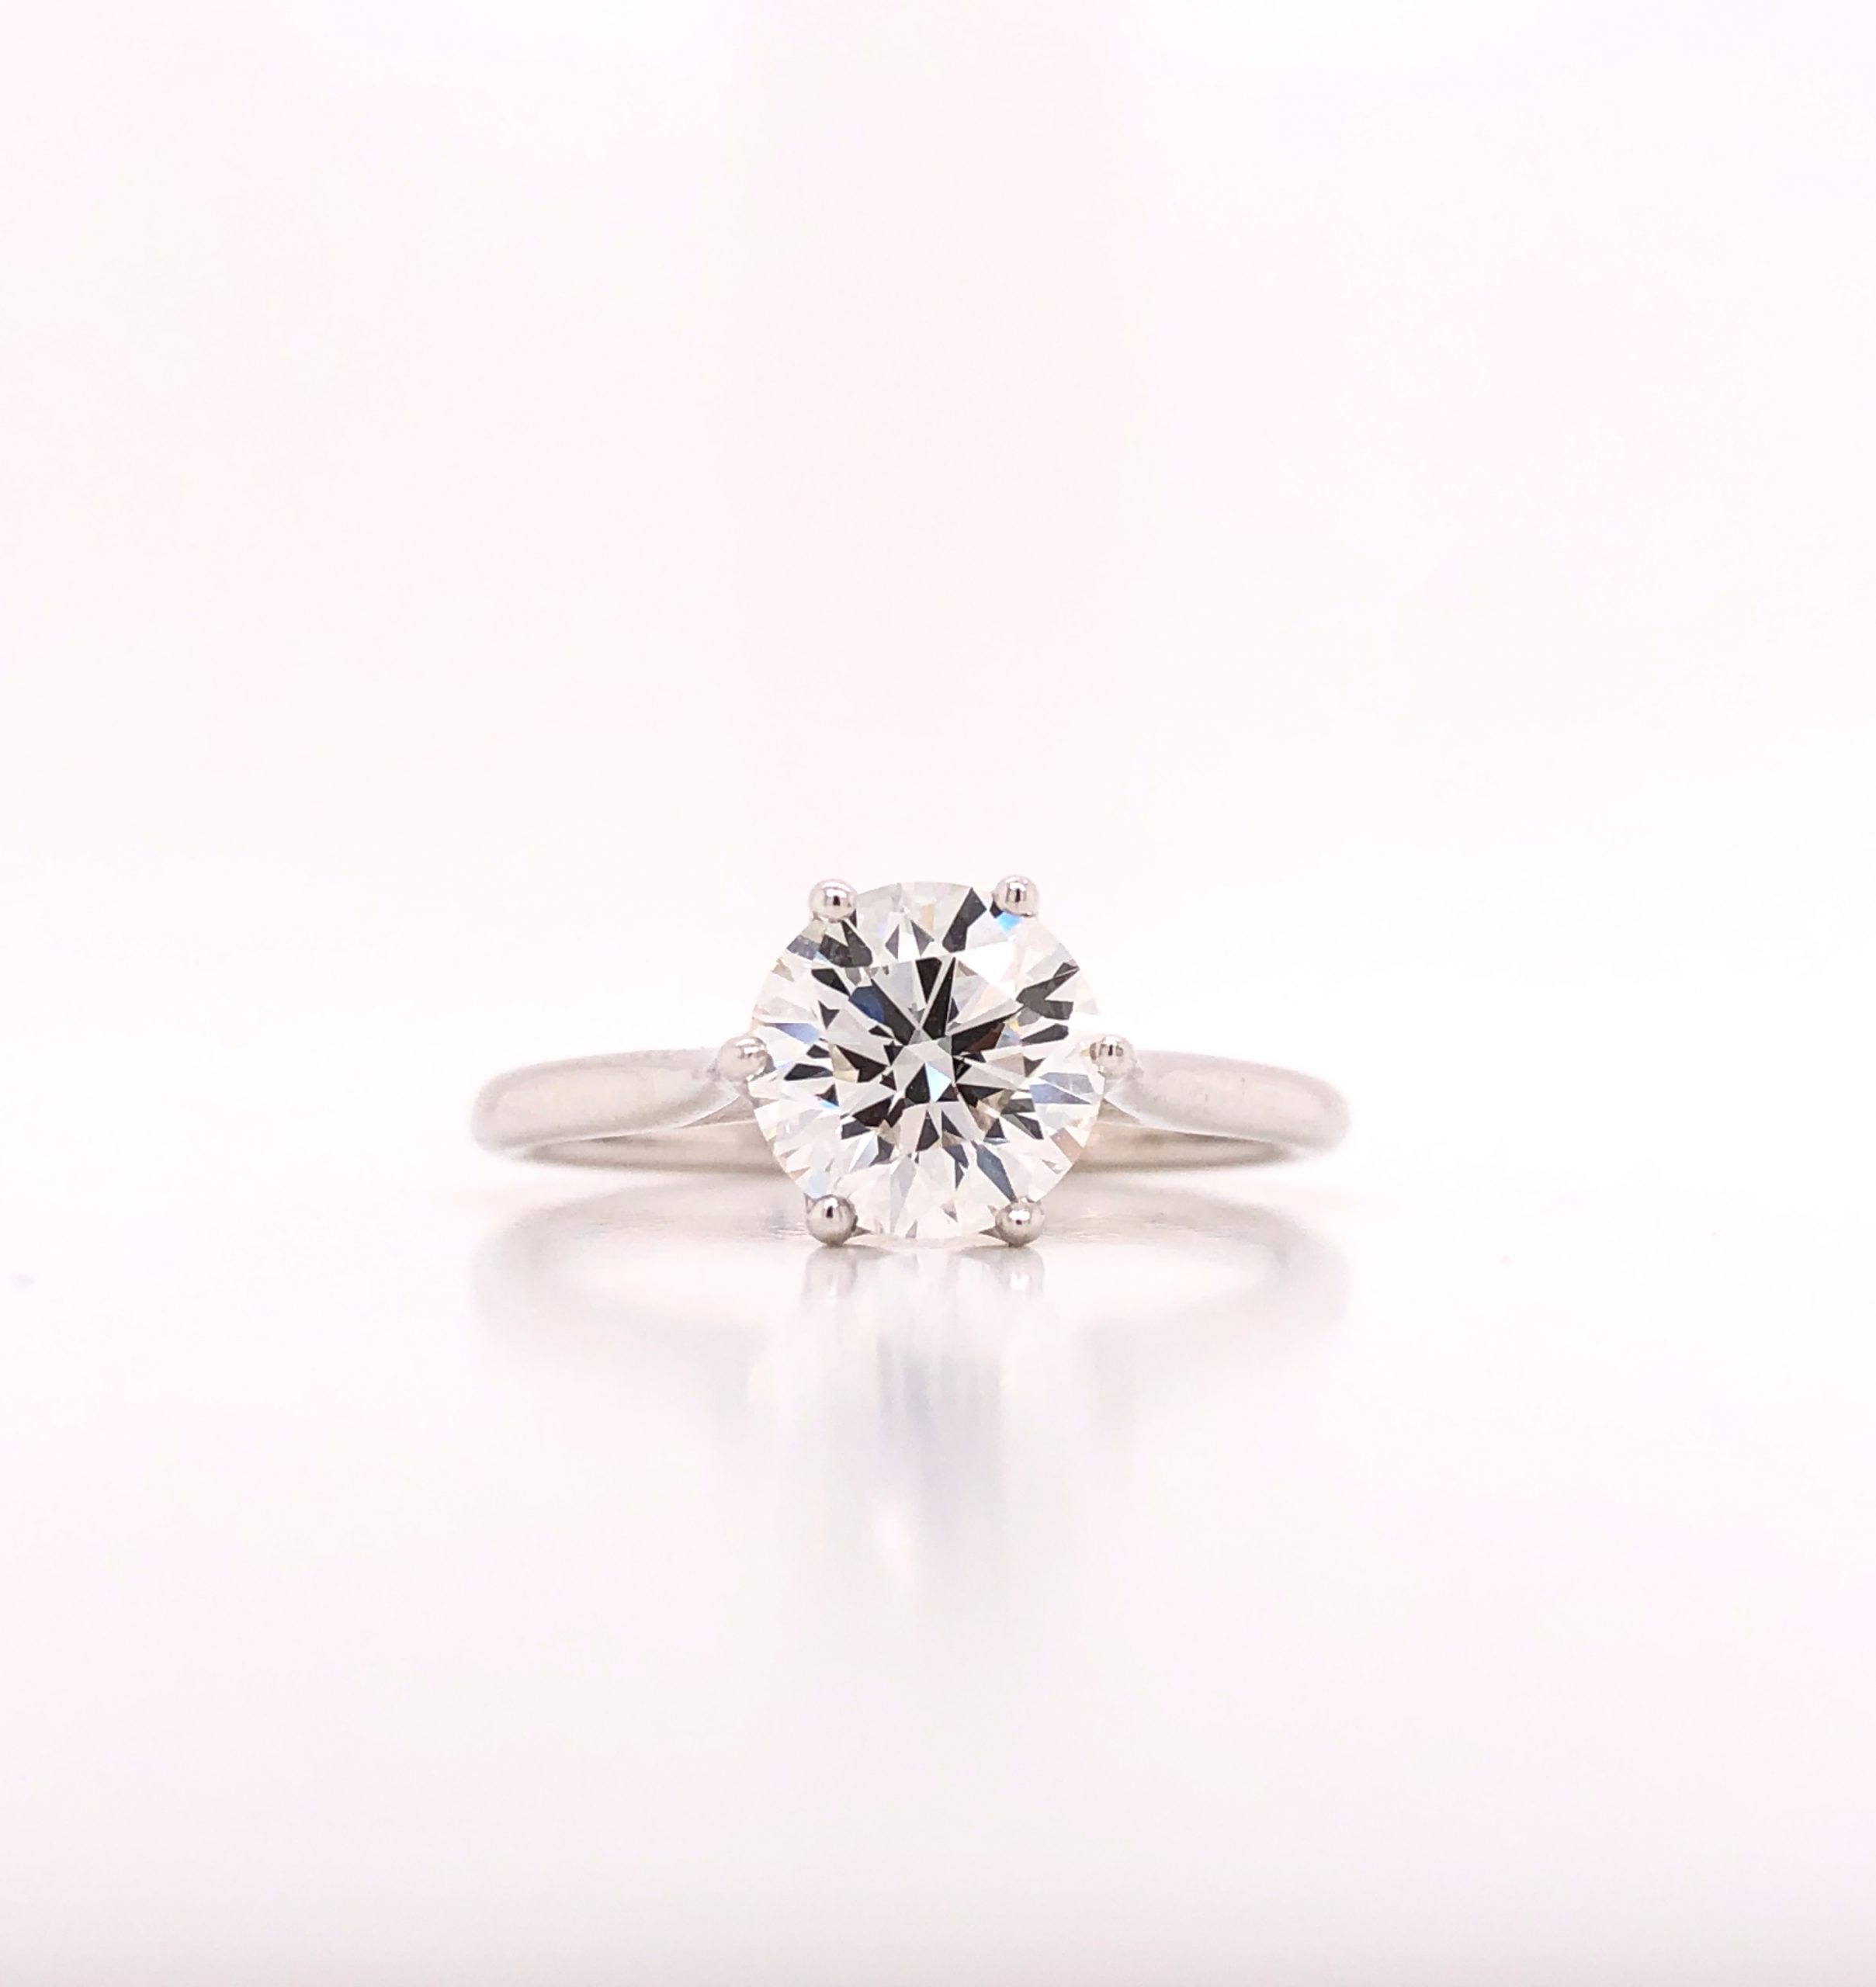 White Gold Solitaire Engagement Ring - 1.53 cttw - David & Sons Fine ...